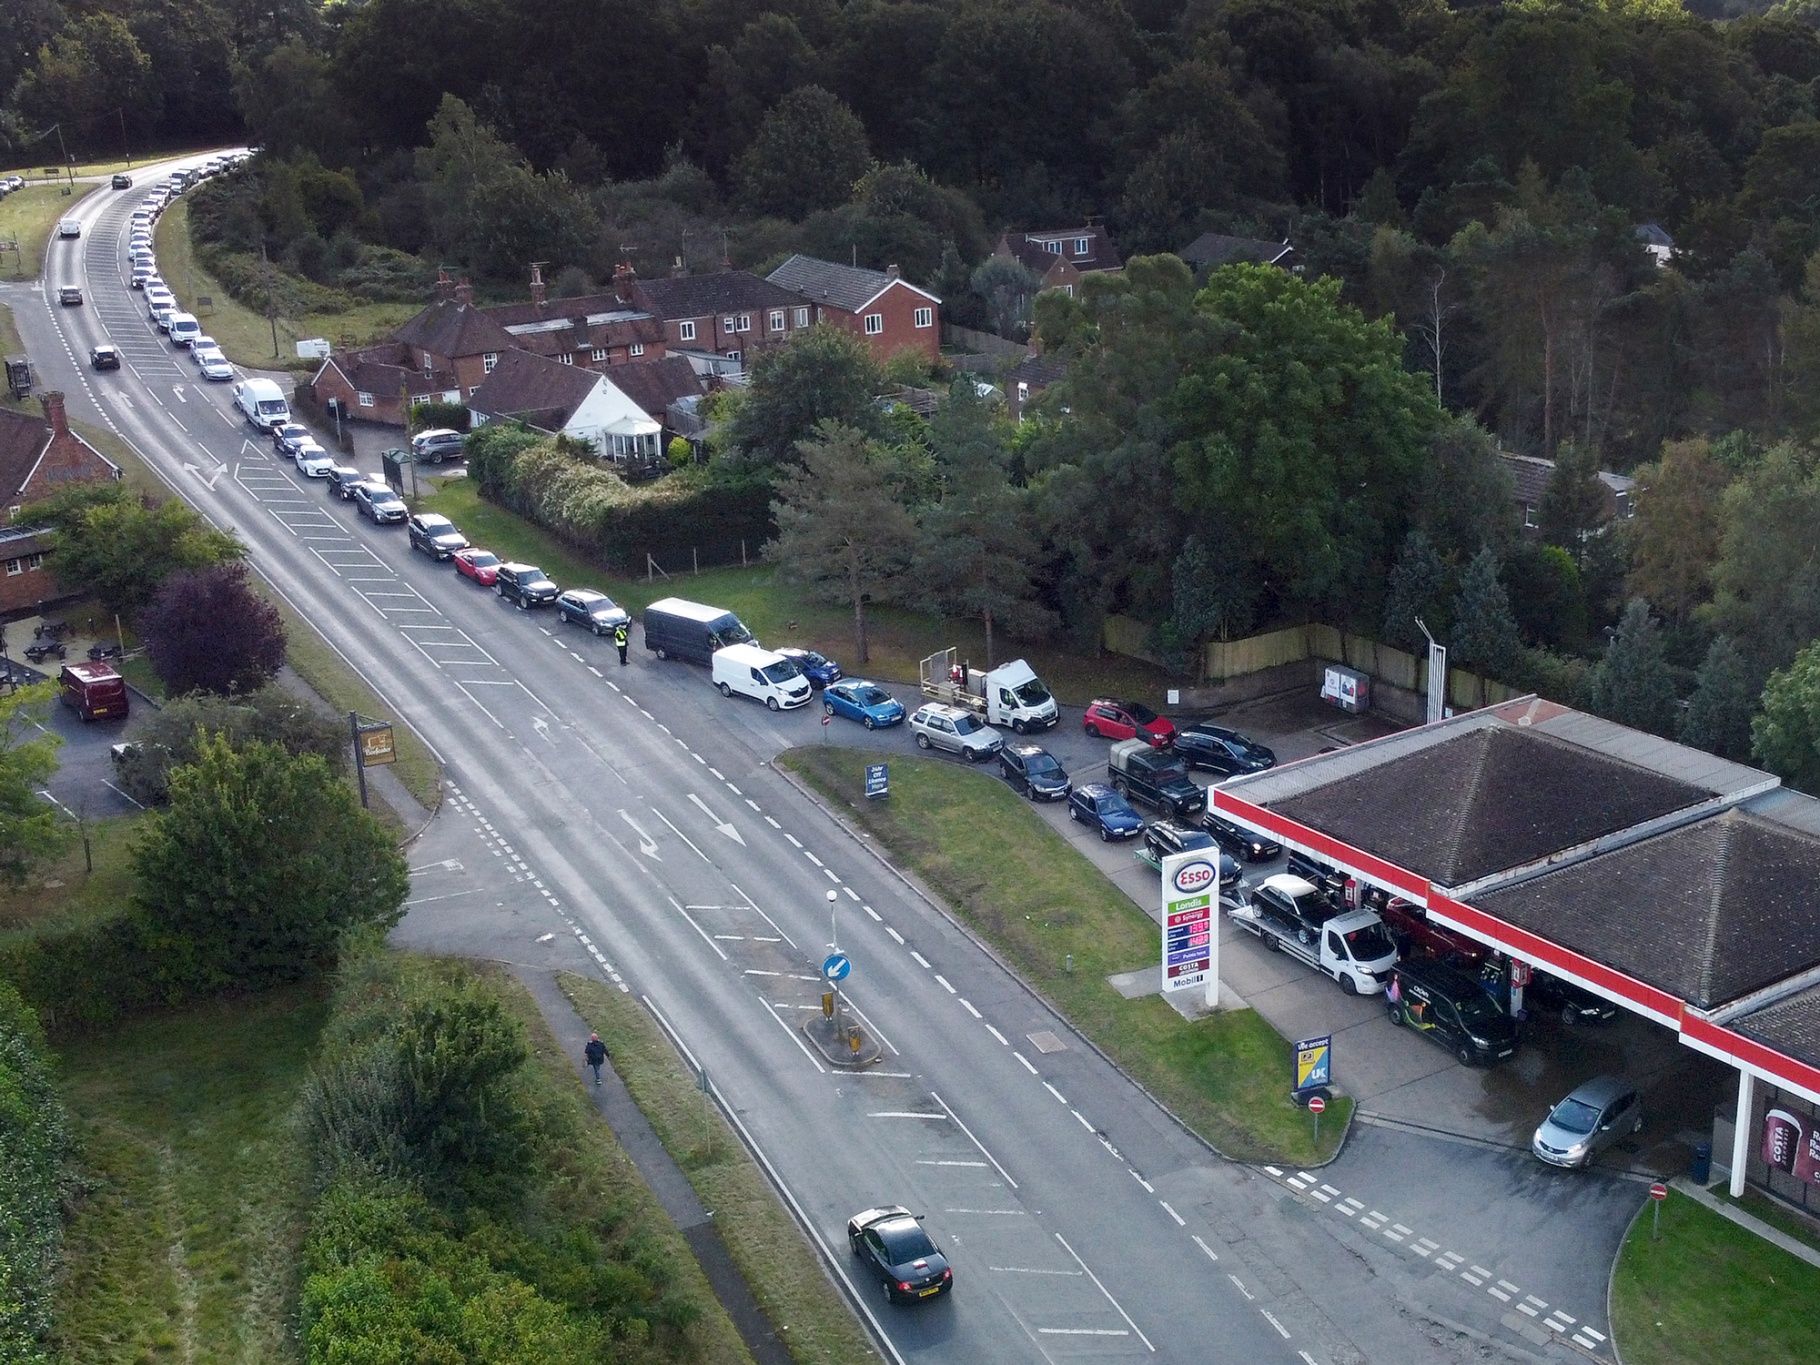 Vehicles queue for fuel at a service station in Ashford, U.K, on Sept. 29.